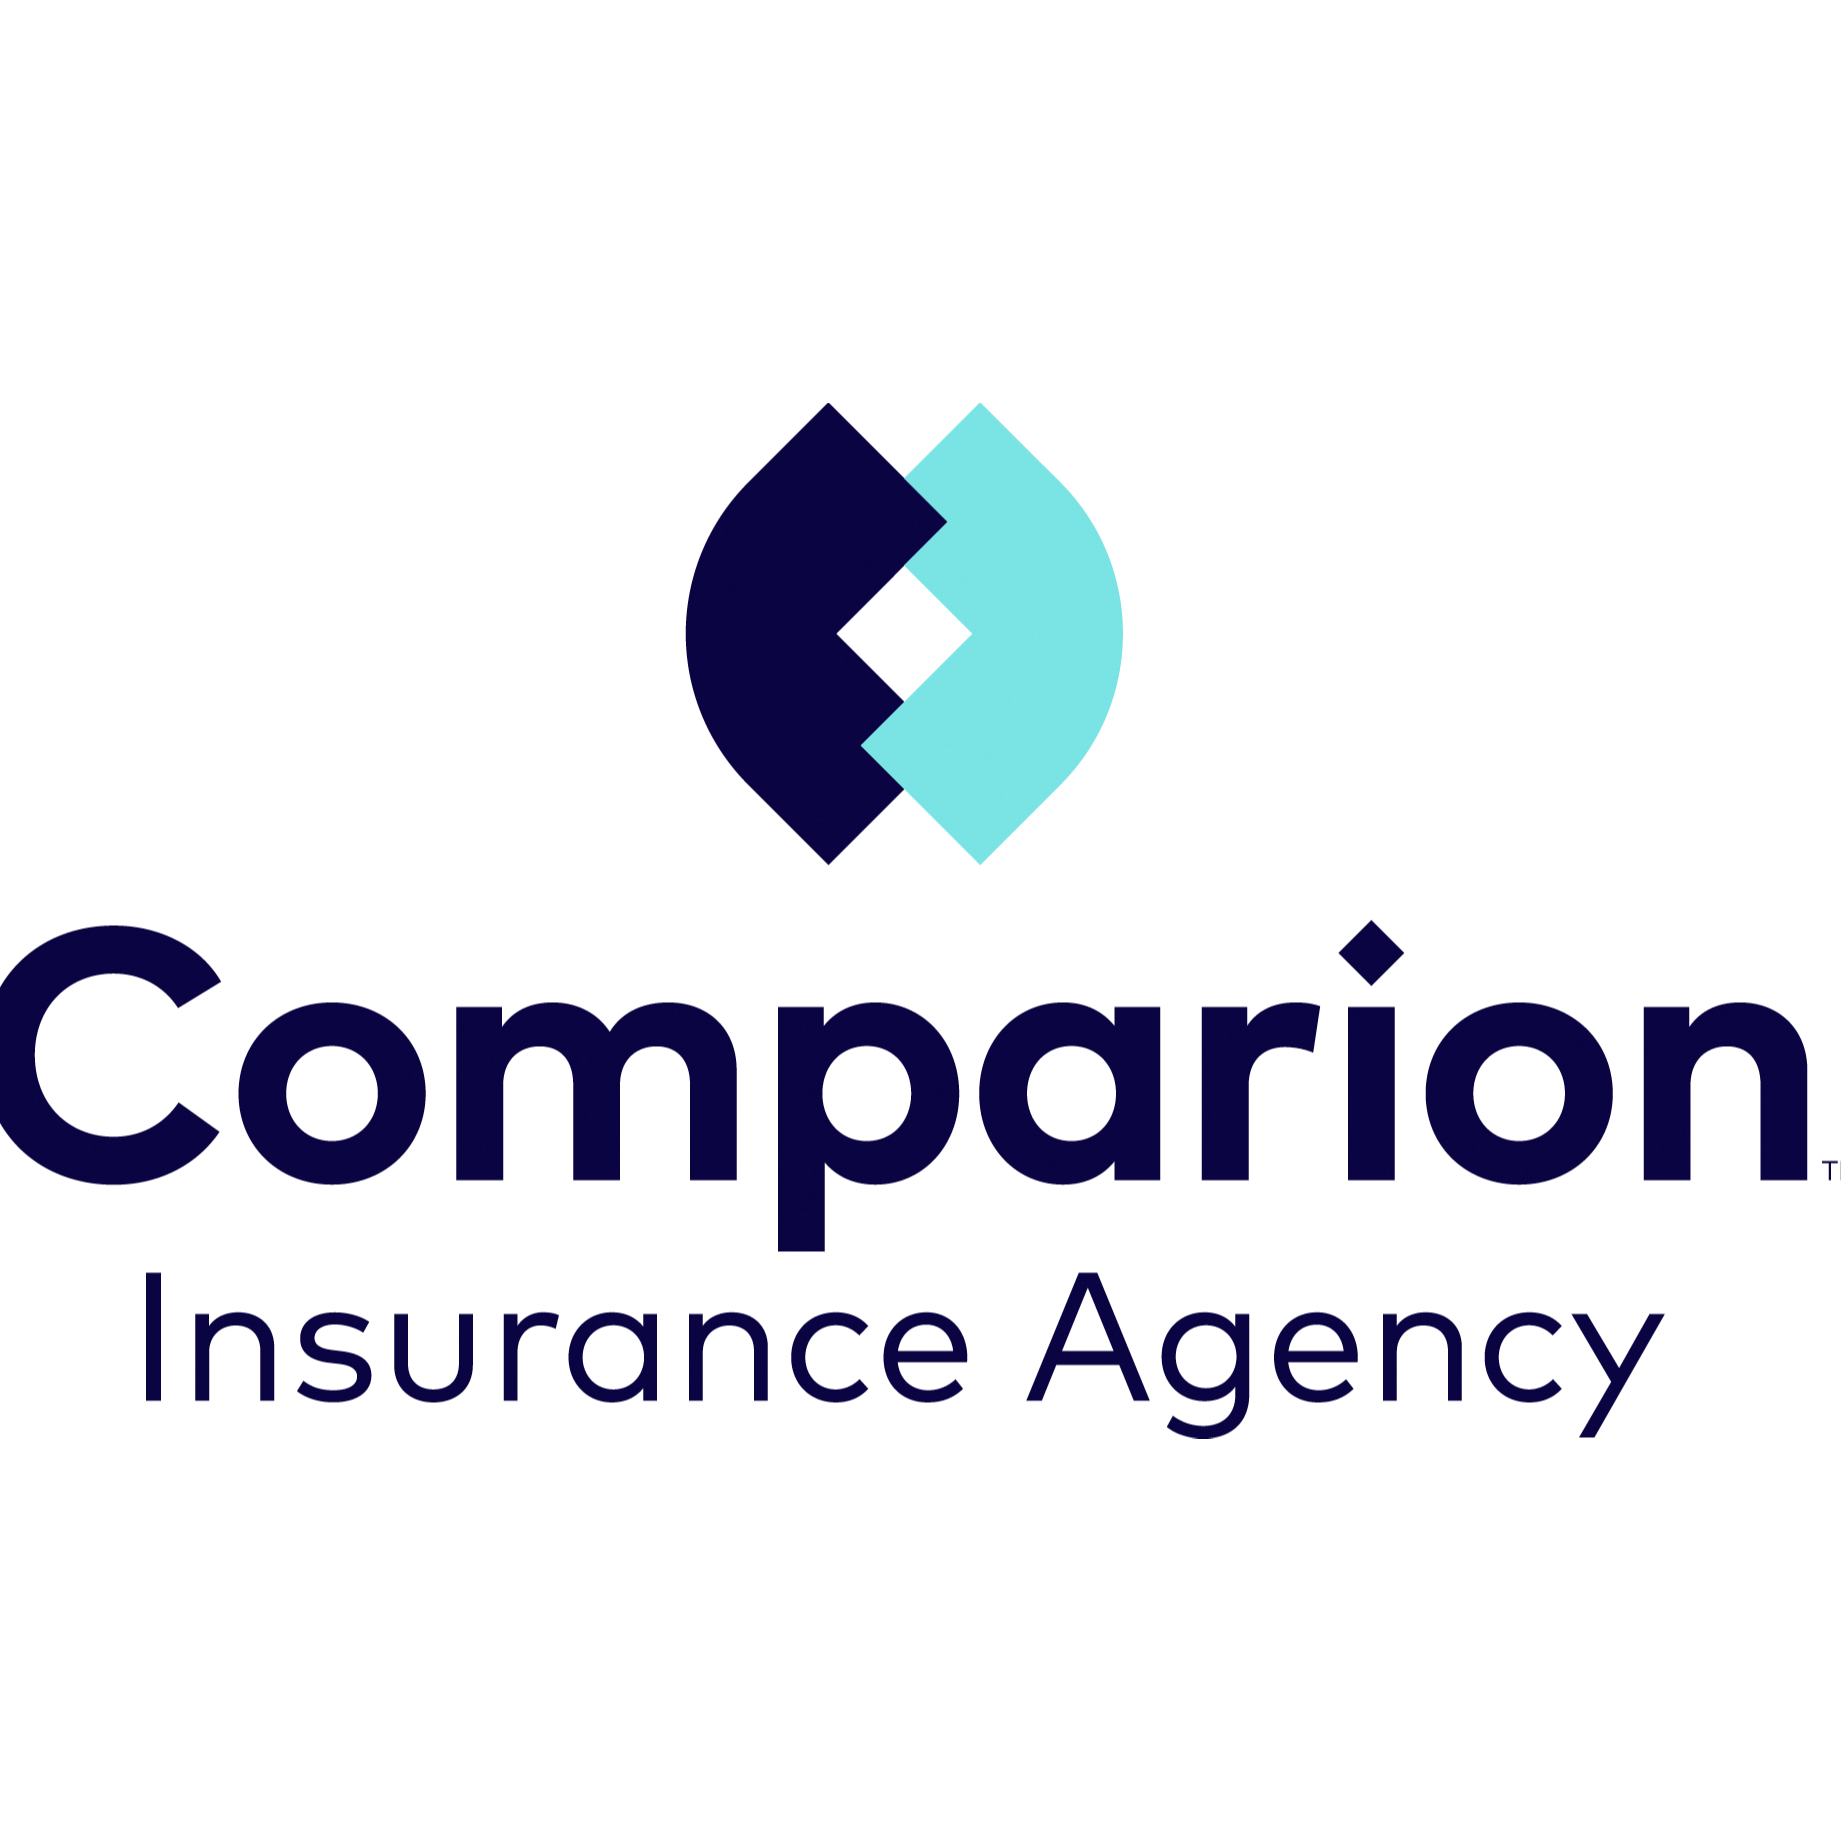 Fabian Negrete at Comparion Insurance Agency